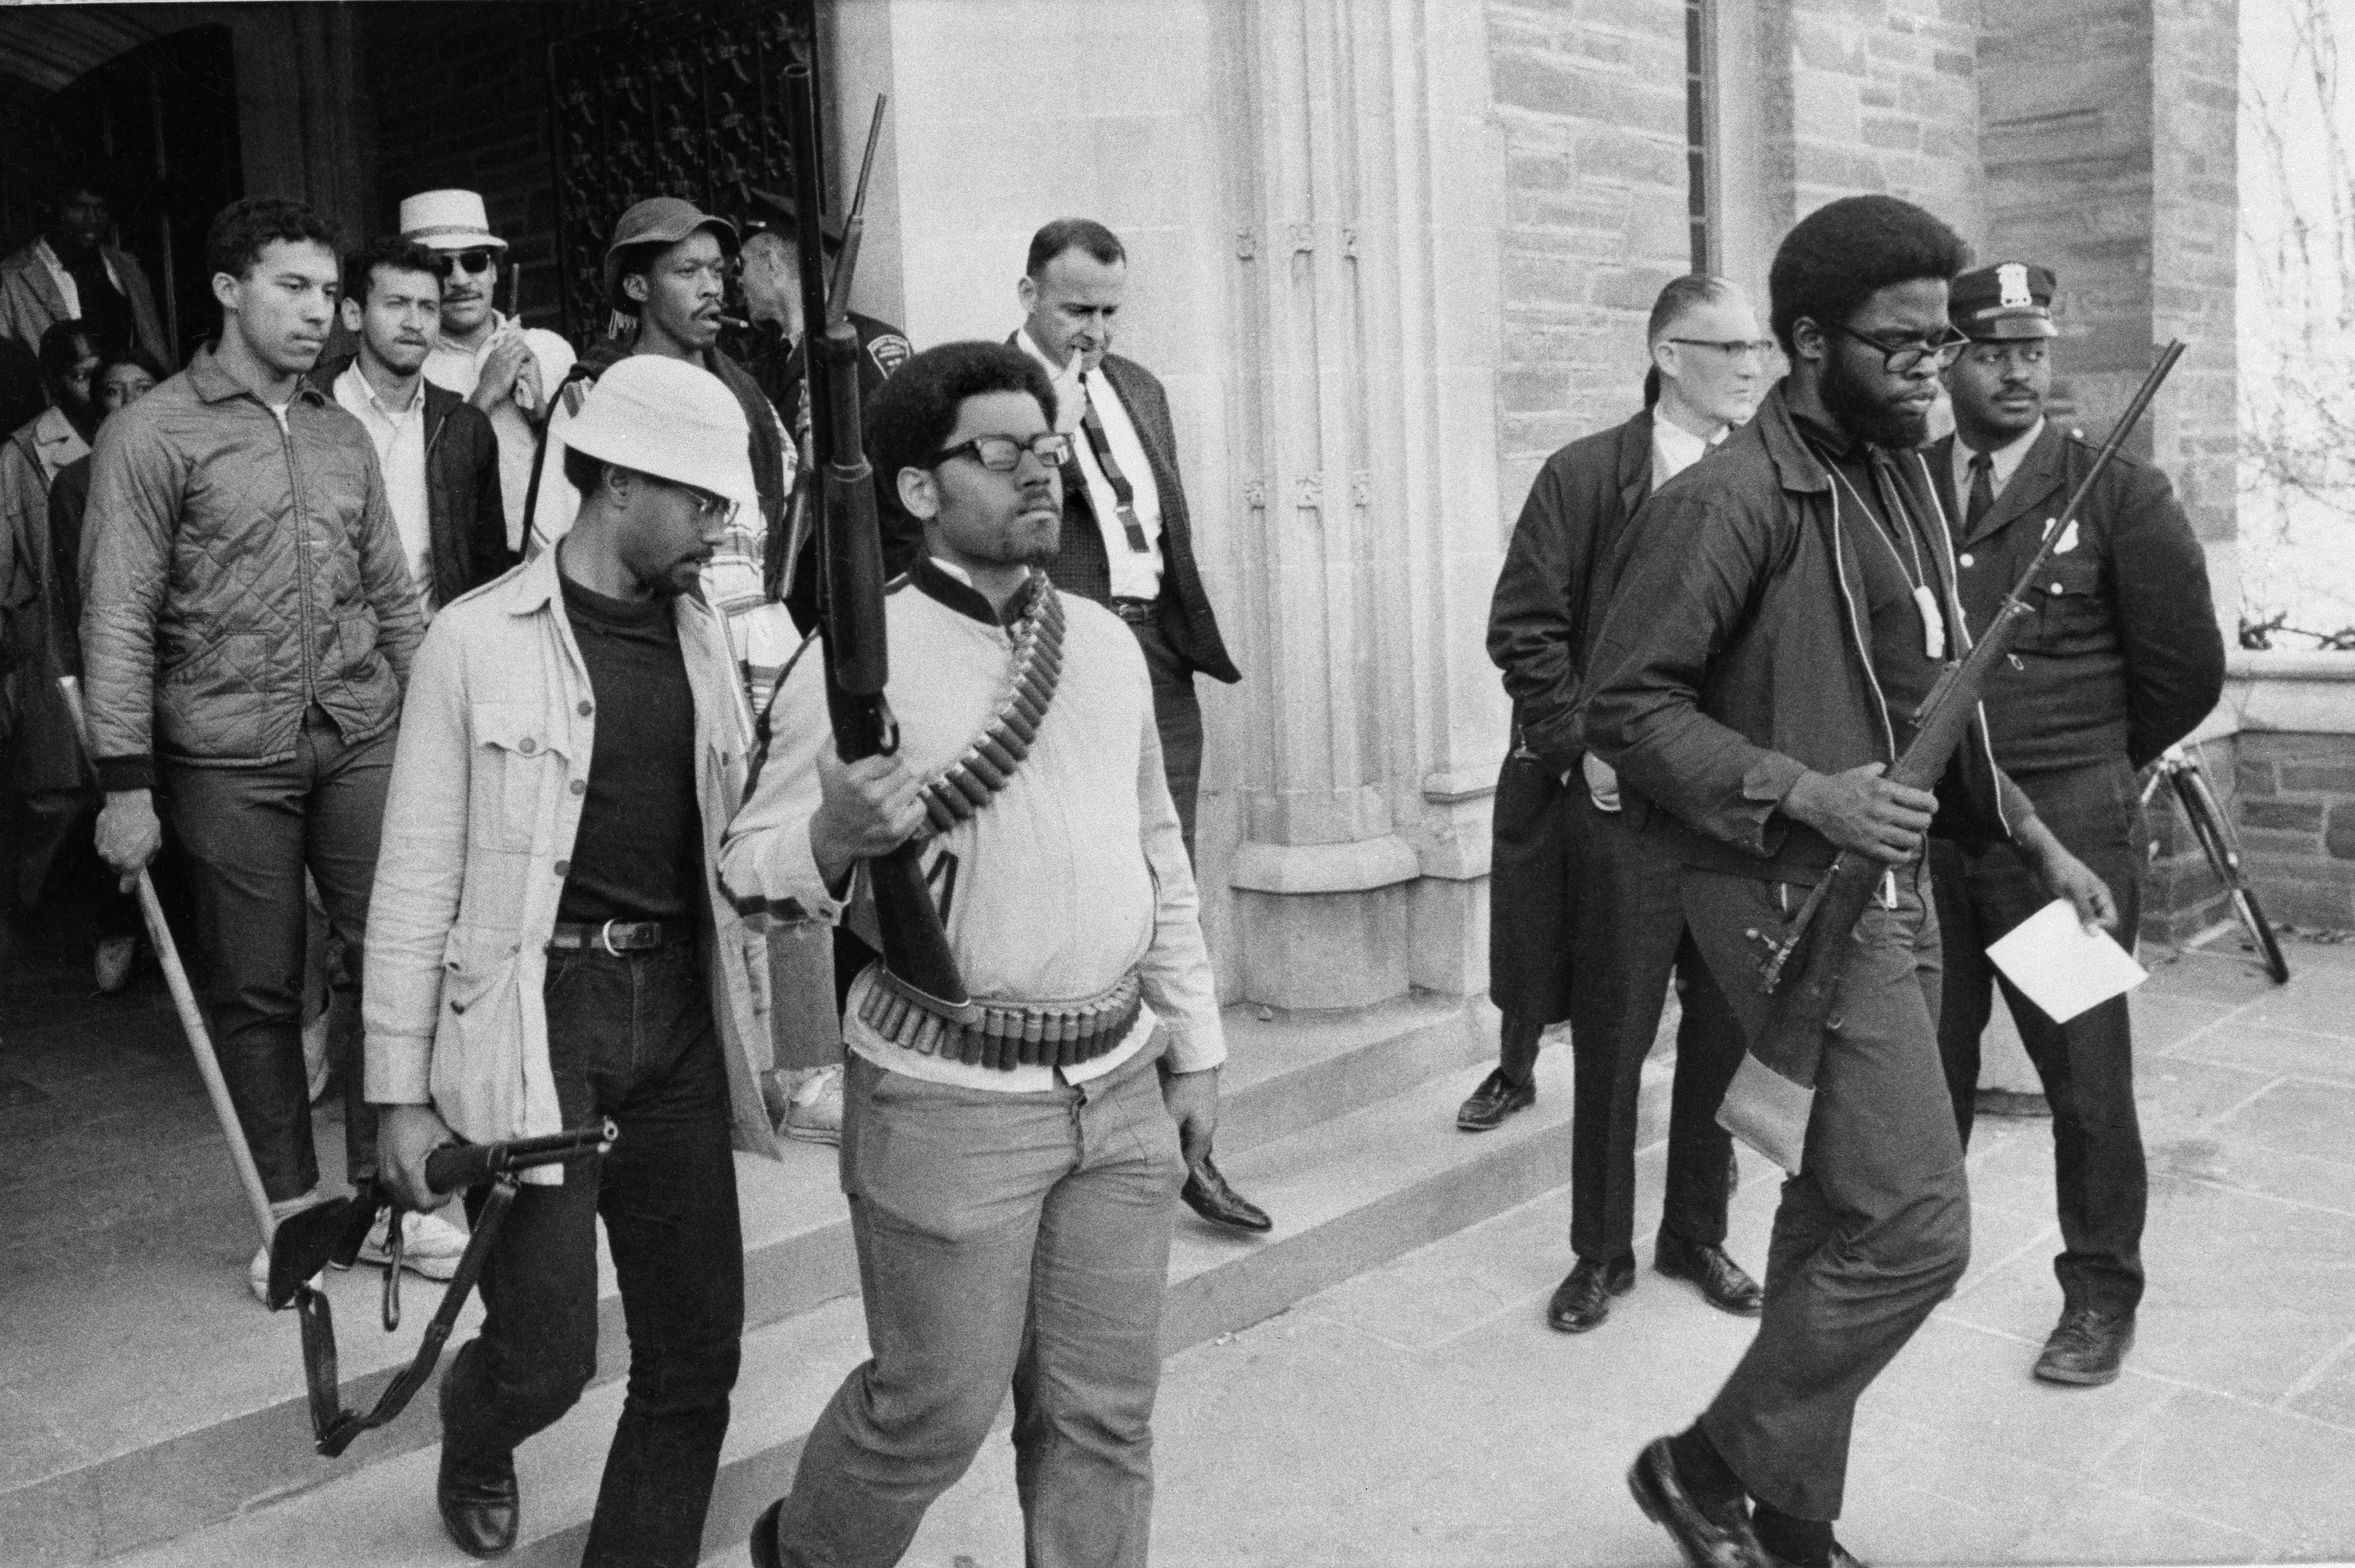 Armed students led by Ed Whitfield, far right, leave Straight Hall at Cornell University in Ithaca, N.Y., after a 36-hour sit-in, April 20, 1969. The students had barricaded themselves in the building demanding a degree-granting African American studies program. University administrators offered to drop some charges against the students and accelerate the opening of an African-American studies center. (AP Photo/Steve Starr)